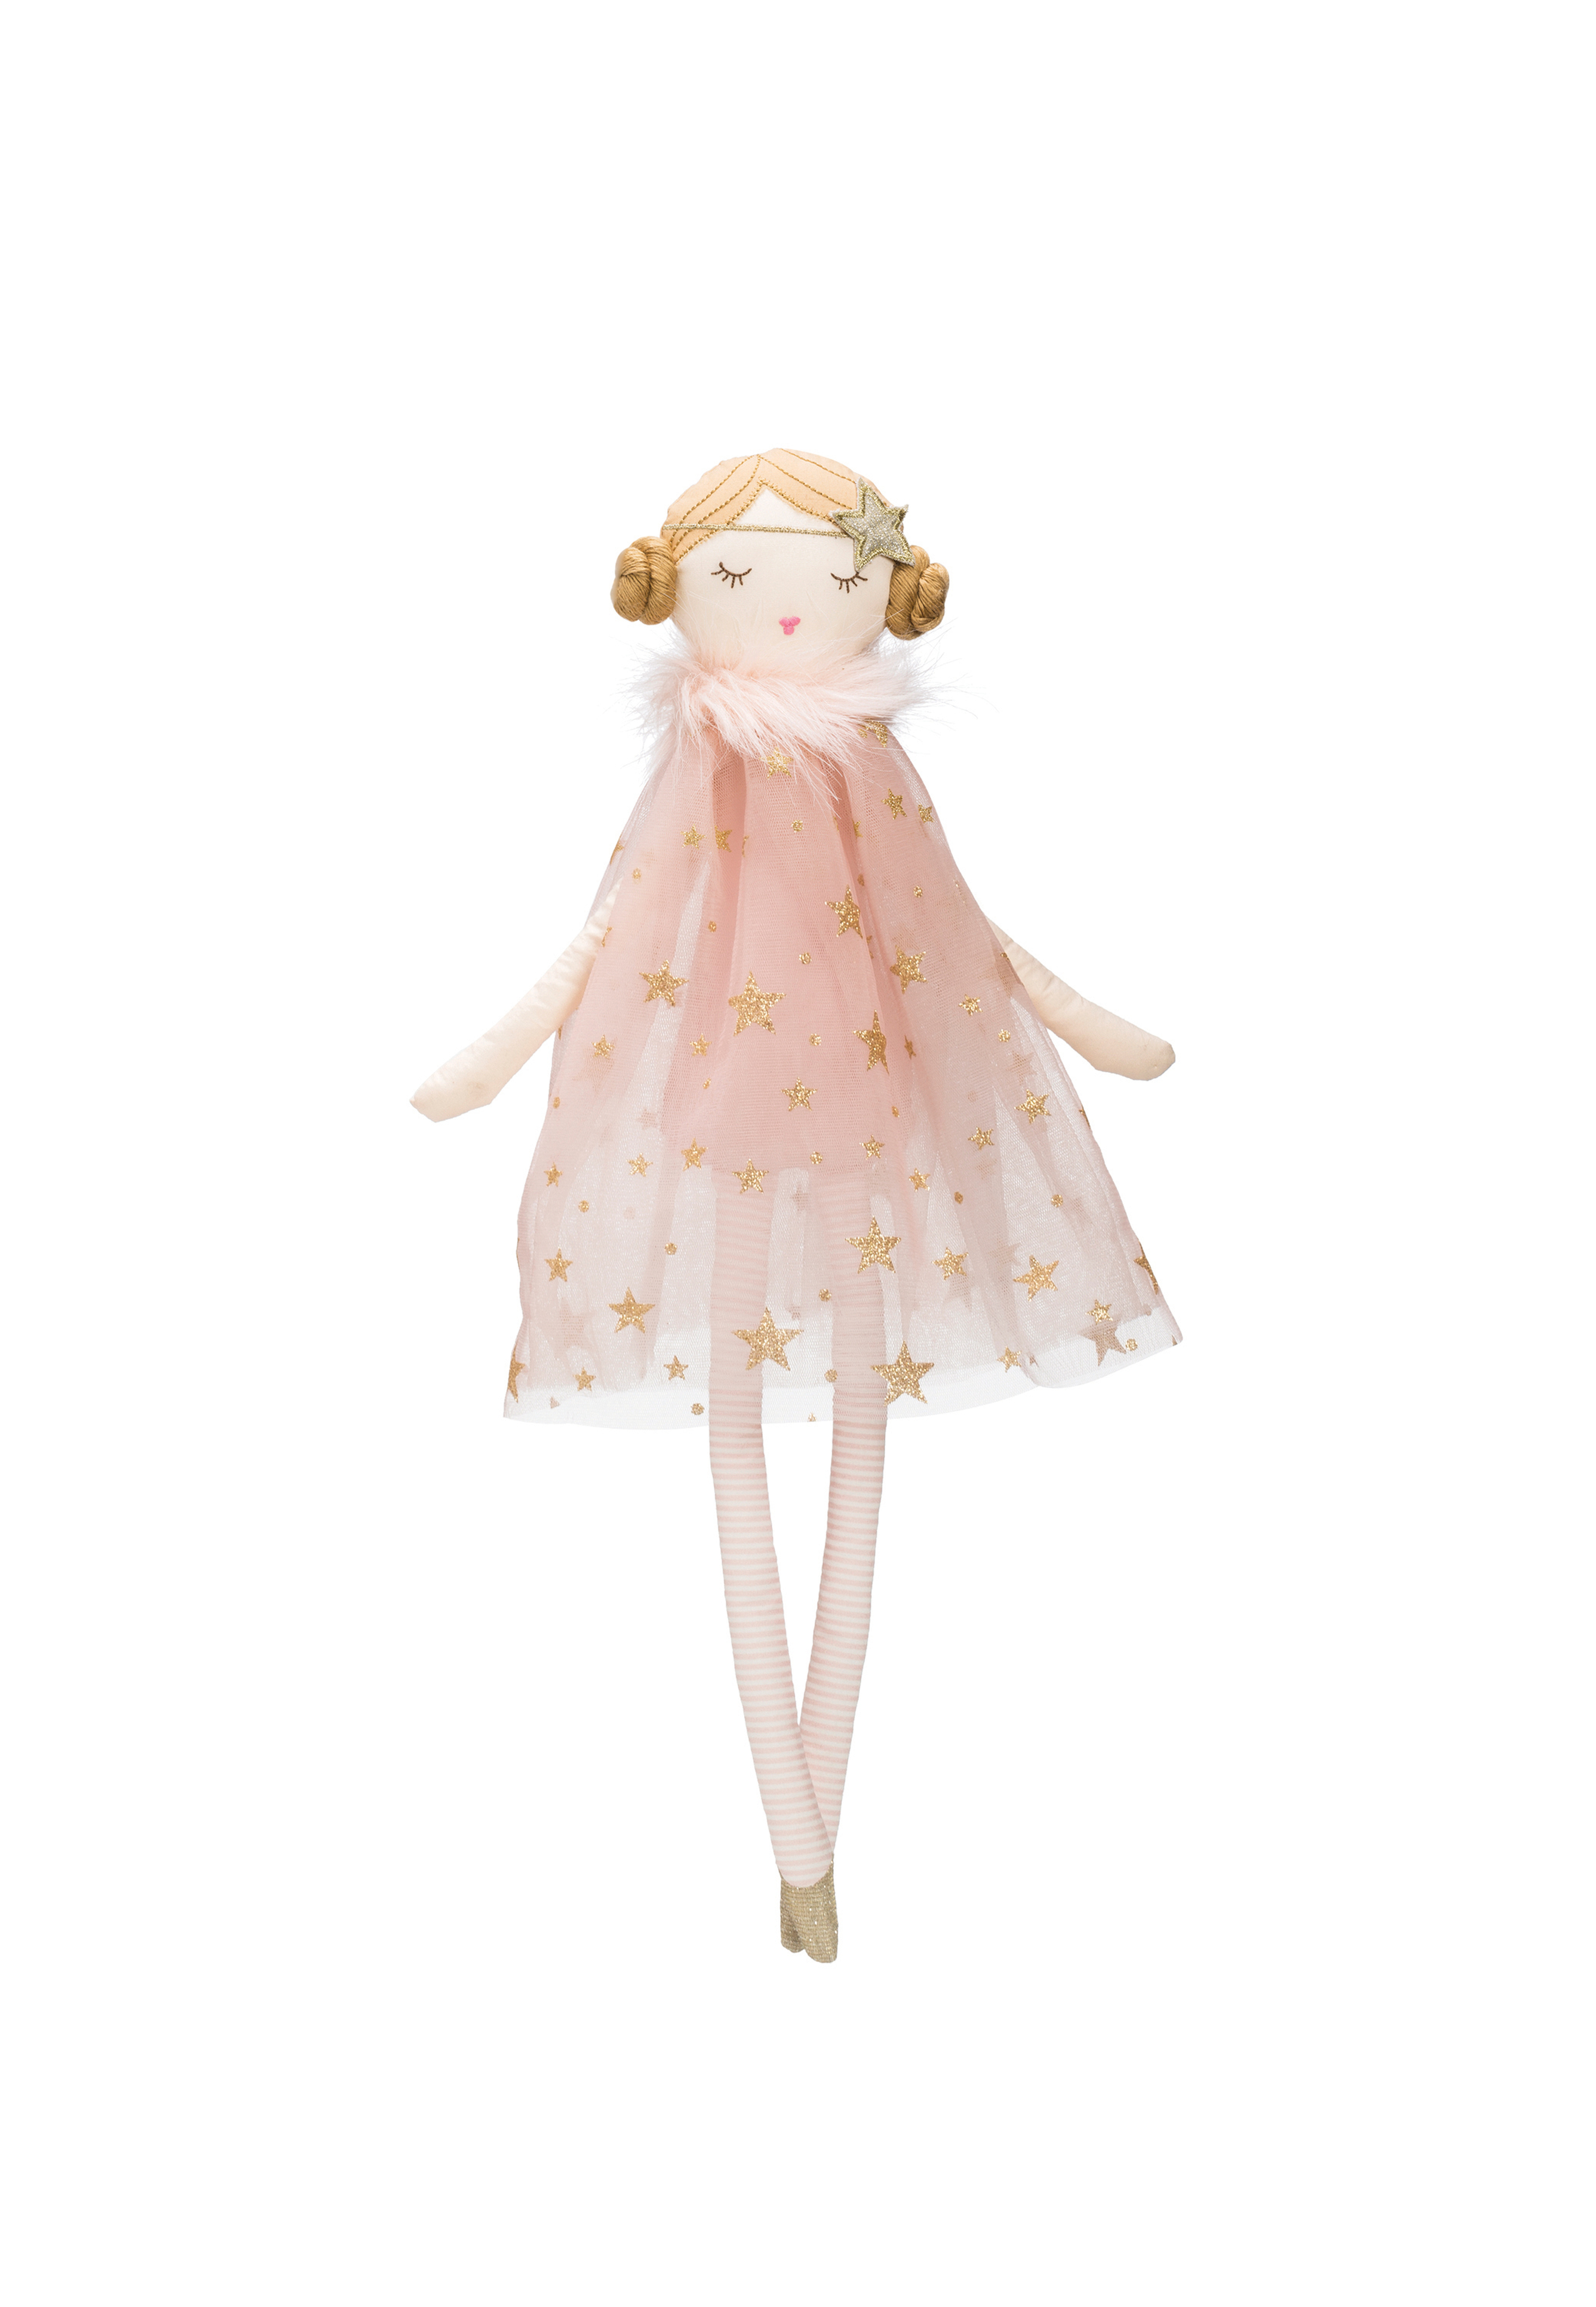 Plush Ballerina Doll with Pink & Gold Star Dress - Nomad Home